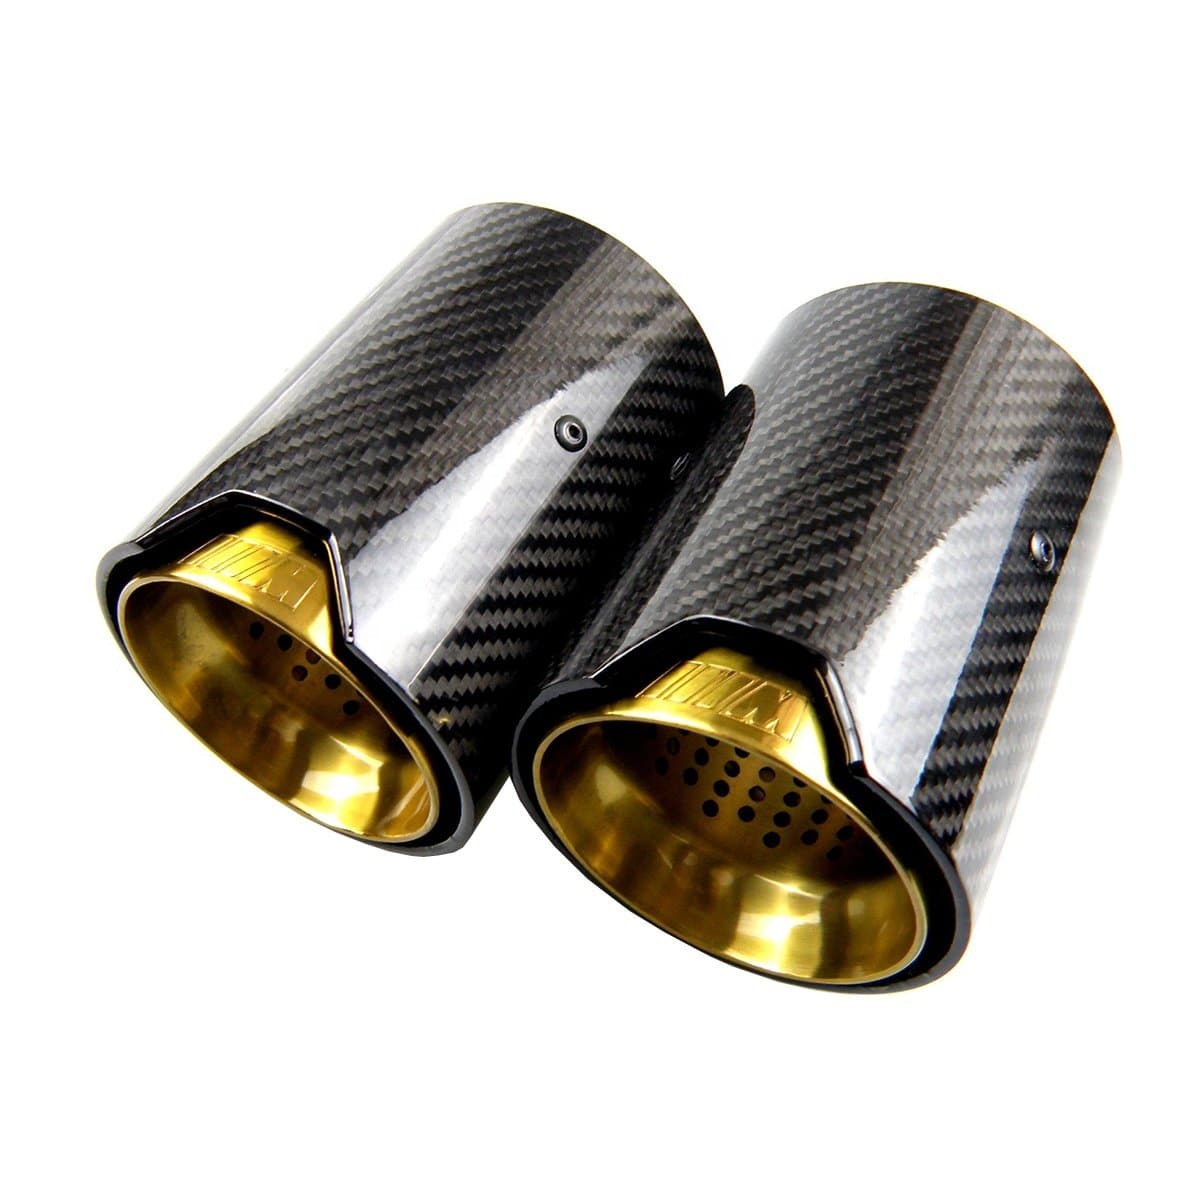 BMW F20 F21 M135I M140I Carbon Fibre Gold M Performance Style Exhaust Tips Set (2014 - 2019) M Performance look whether you have the M Performance Exhaust or not - M135I or M140I those M Performance looks without needing the M Performance Rear Section. BMW F20 1 Series M135I M140I BMW F21 1 Series M135I M140I